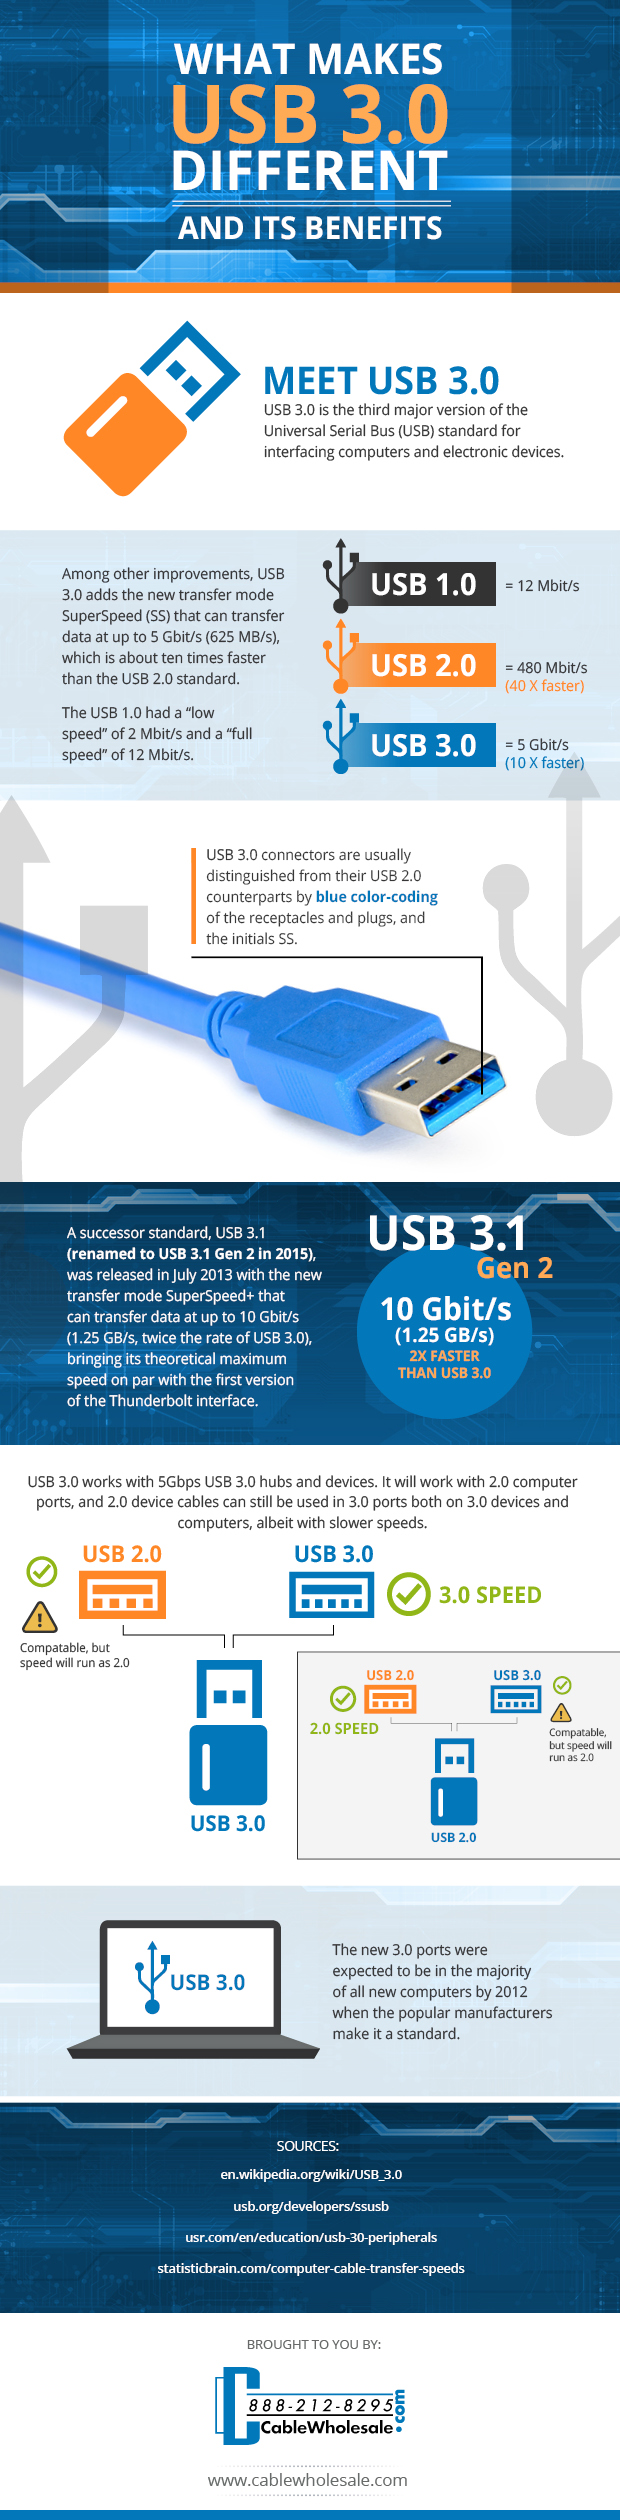 What Makes USB 3.0 Different - and What Are Its Benefits?